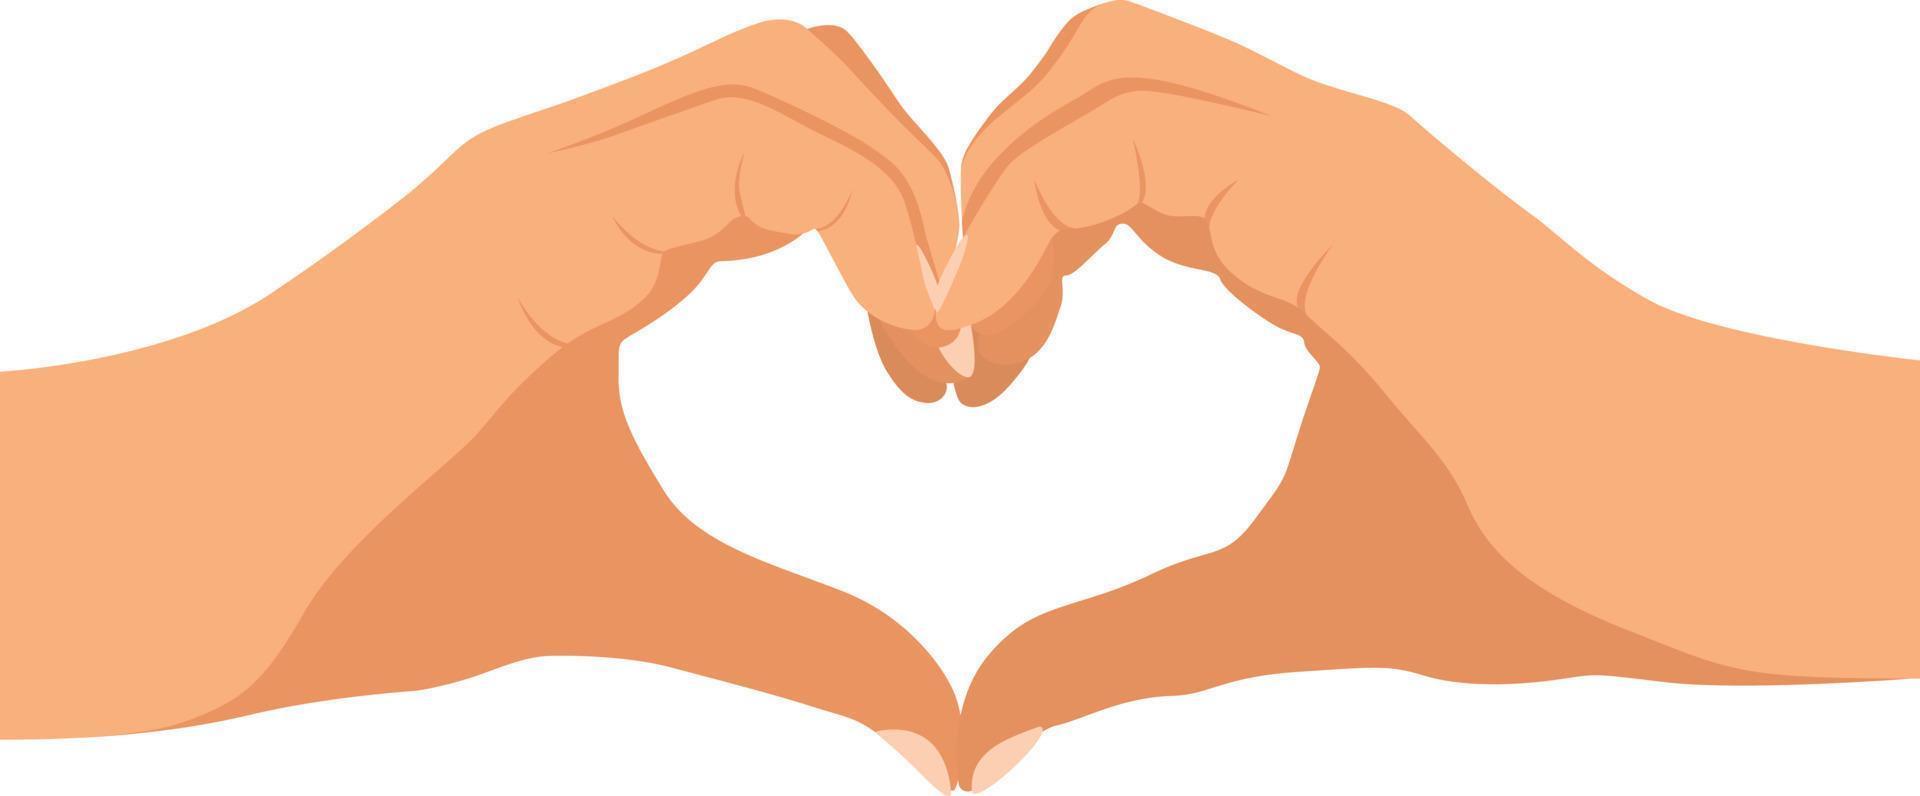 Handshake symbol forming a heart.Hands forming a heart isolated. make a heart with a touch of hands. vector illustration